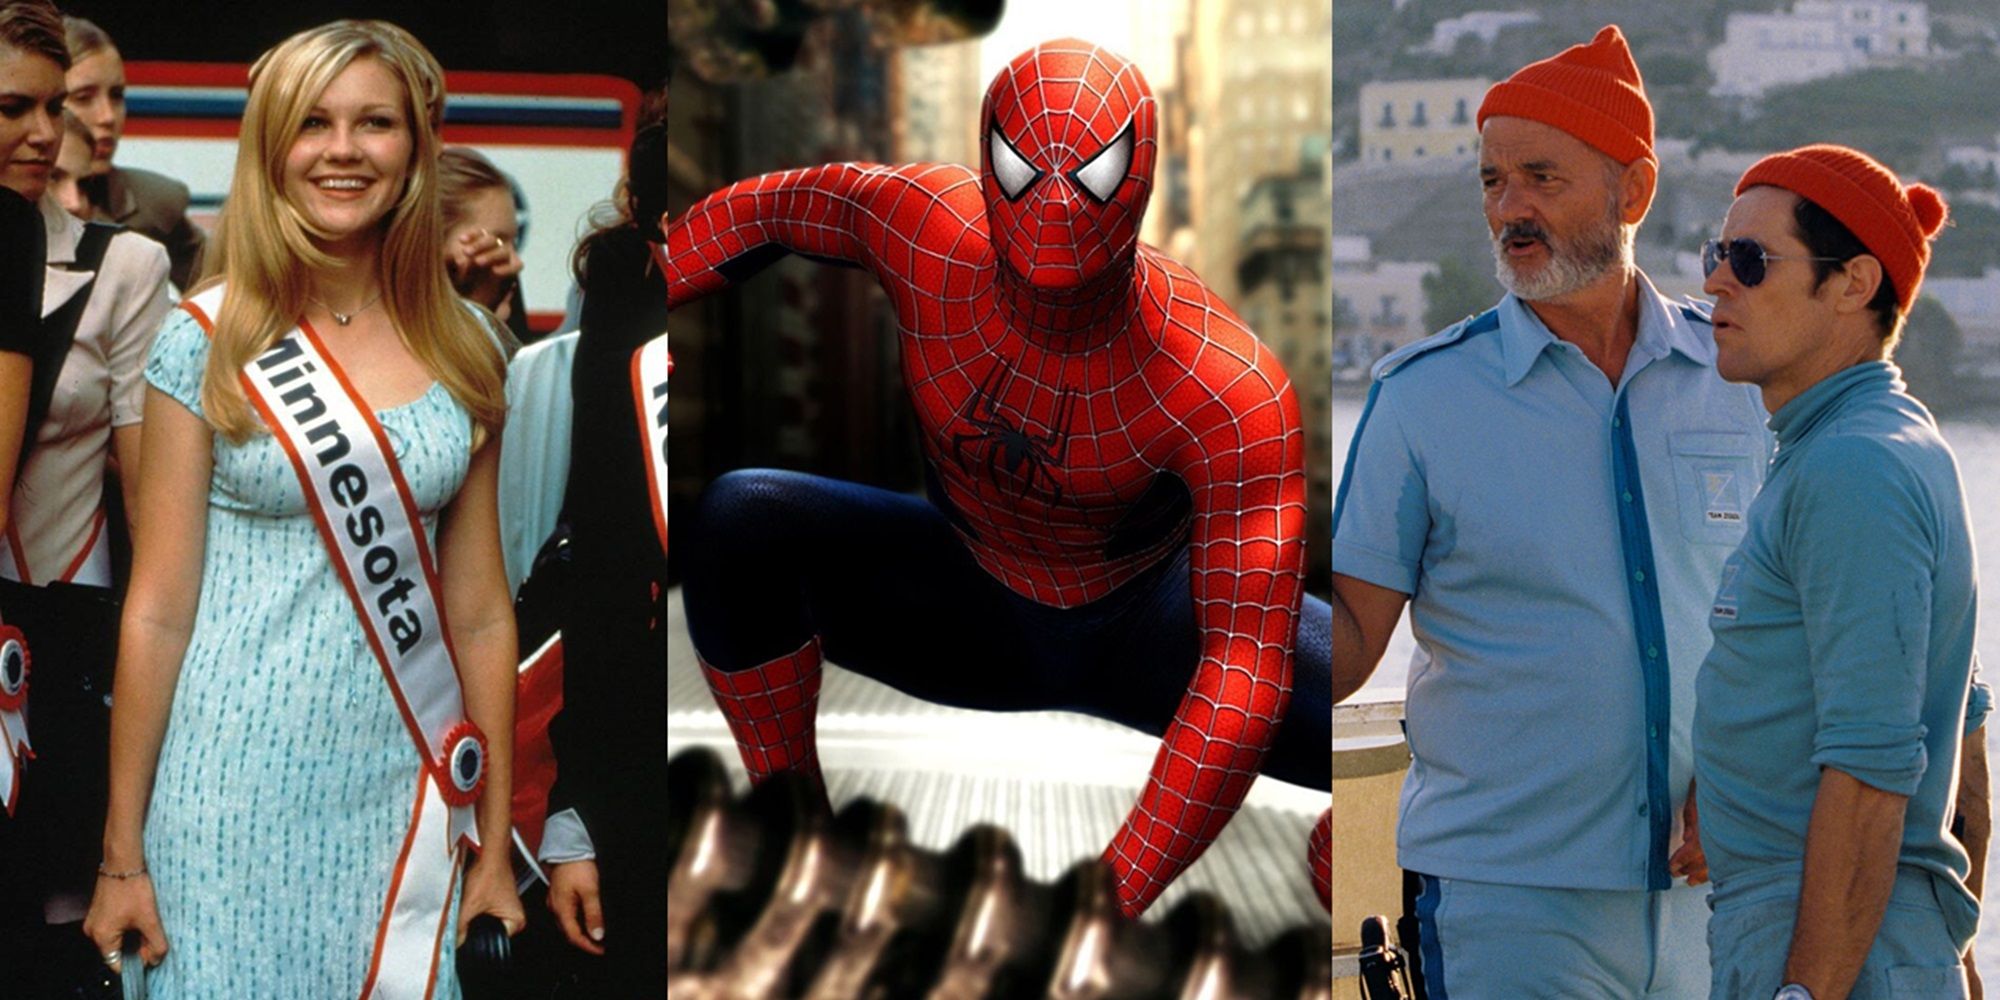 Underrated movies starring Spider-Man actors